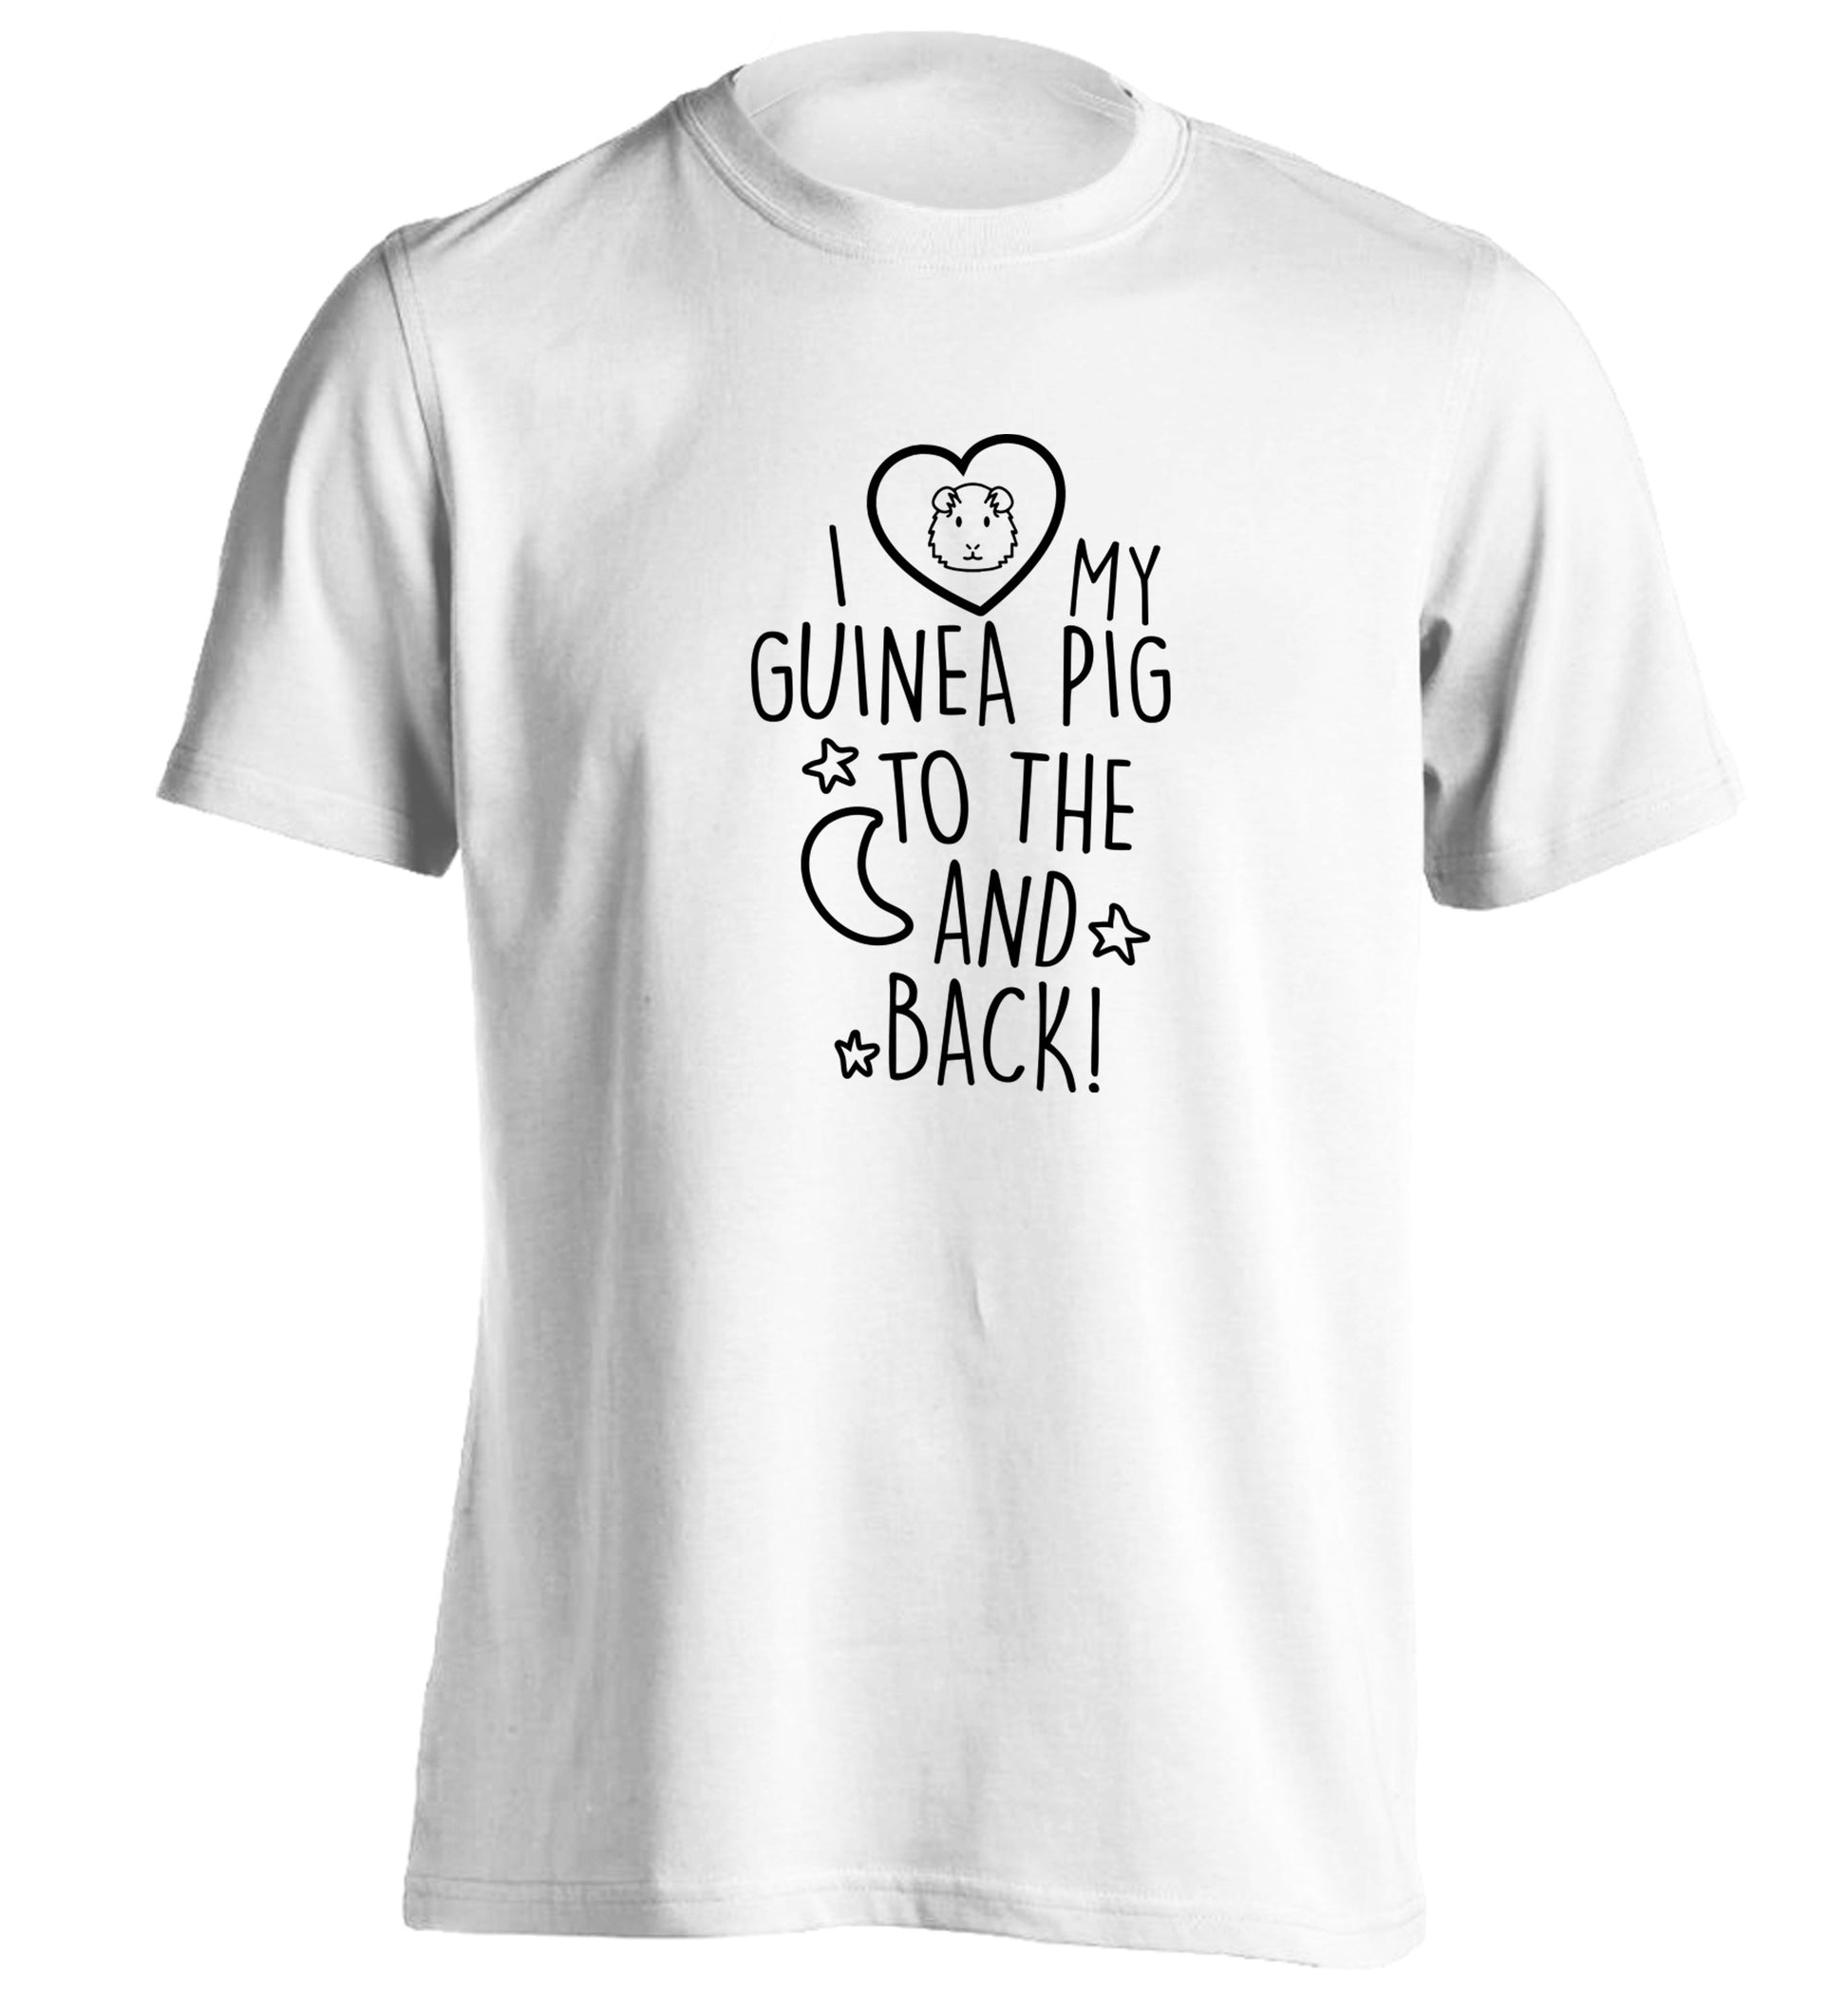 I love my guinea pig to the moon and back adults unisex white Tshirt 2XL